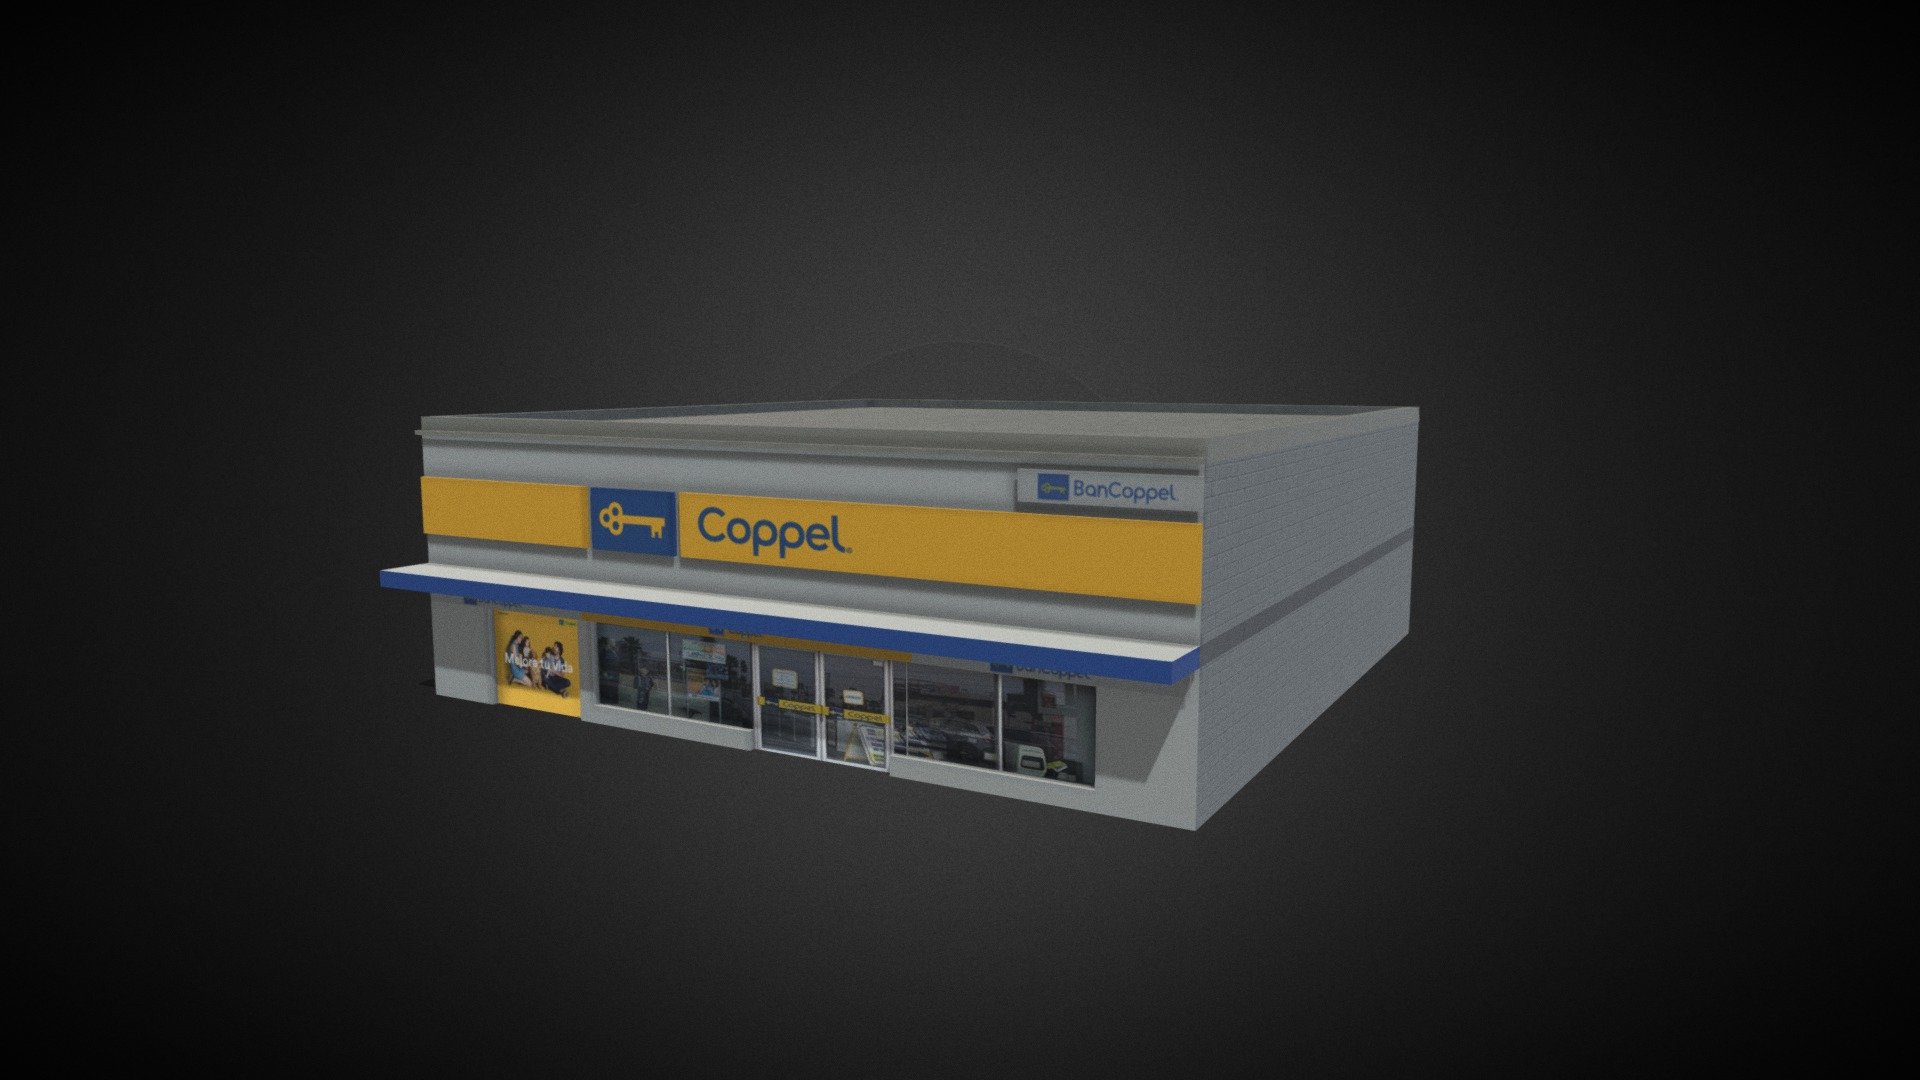 Coppel - 3D model by Checo Mx. [a75f268] - Sketchfab